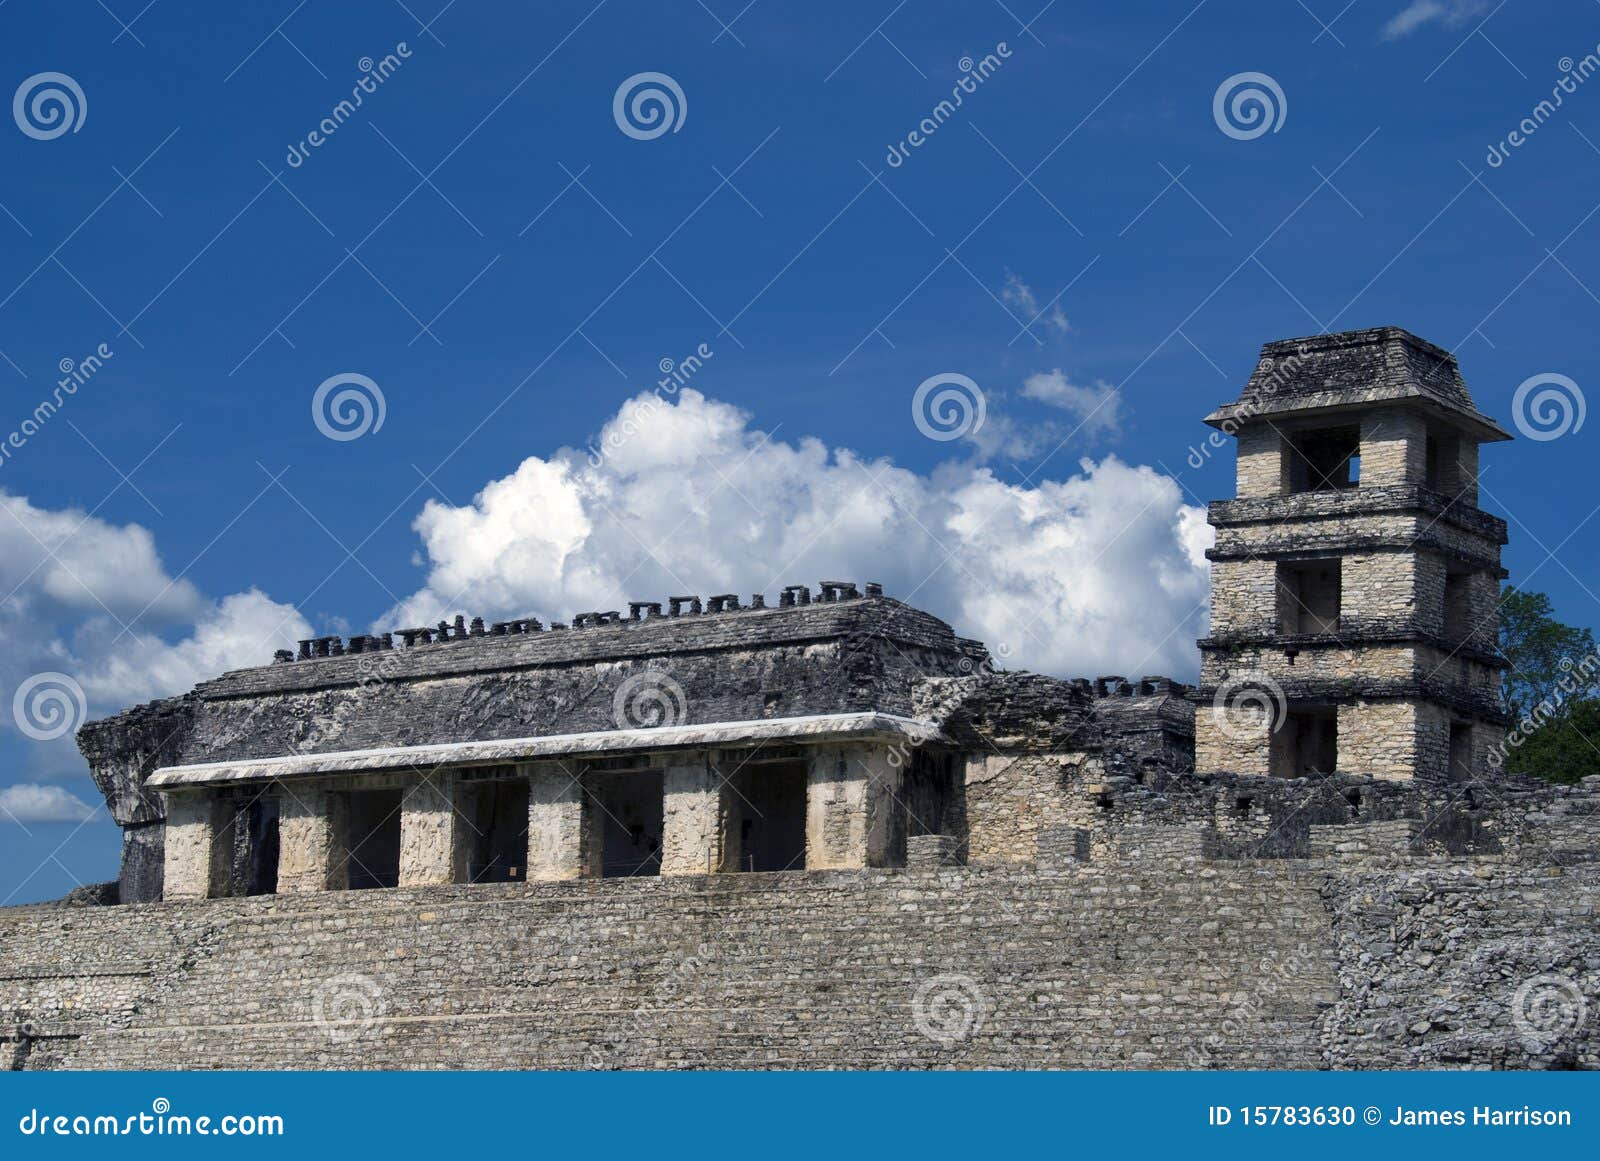 the tower and palace at palenque in chiapas, mexic